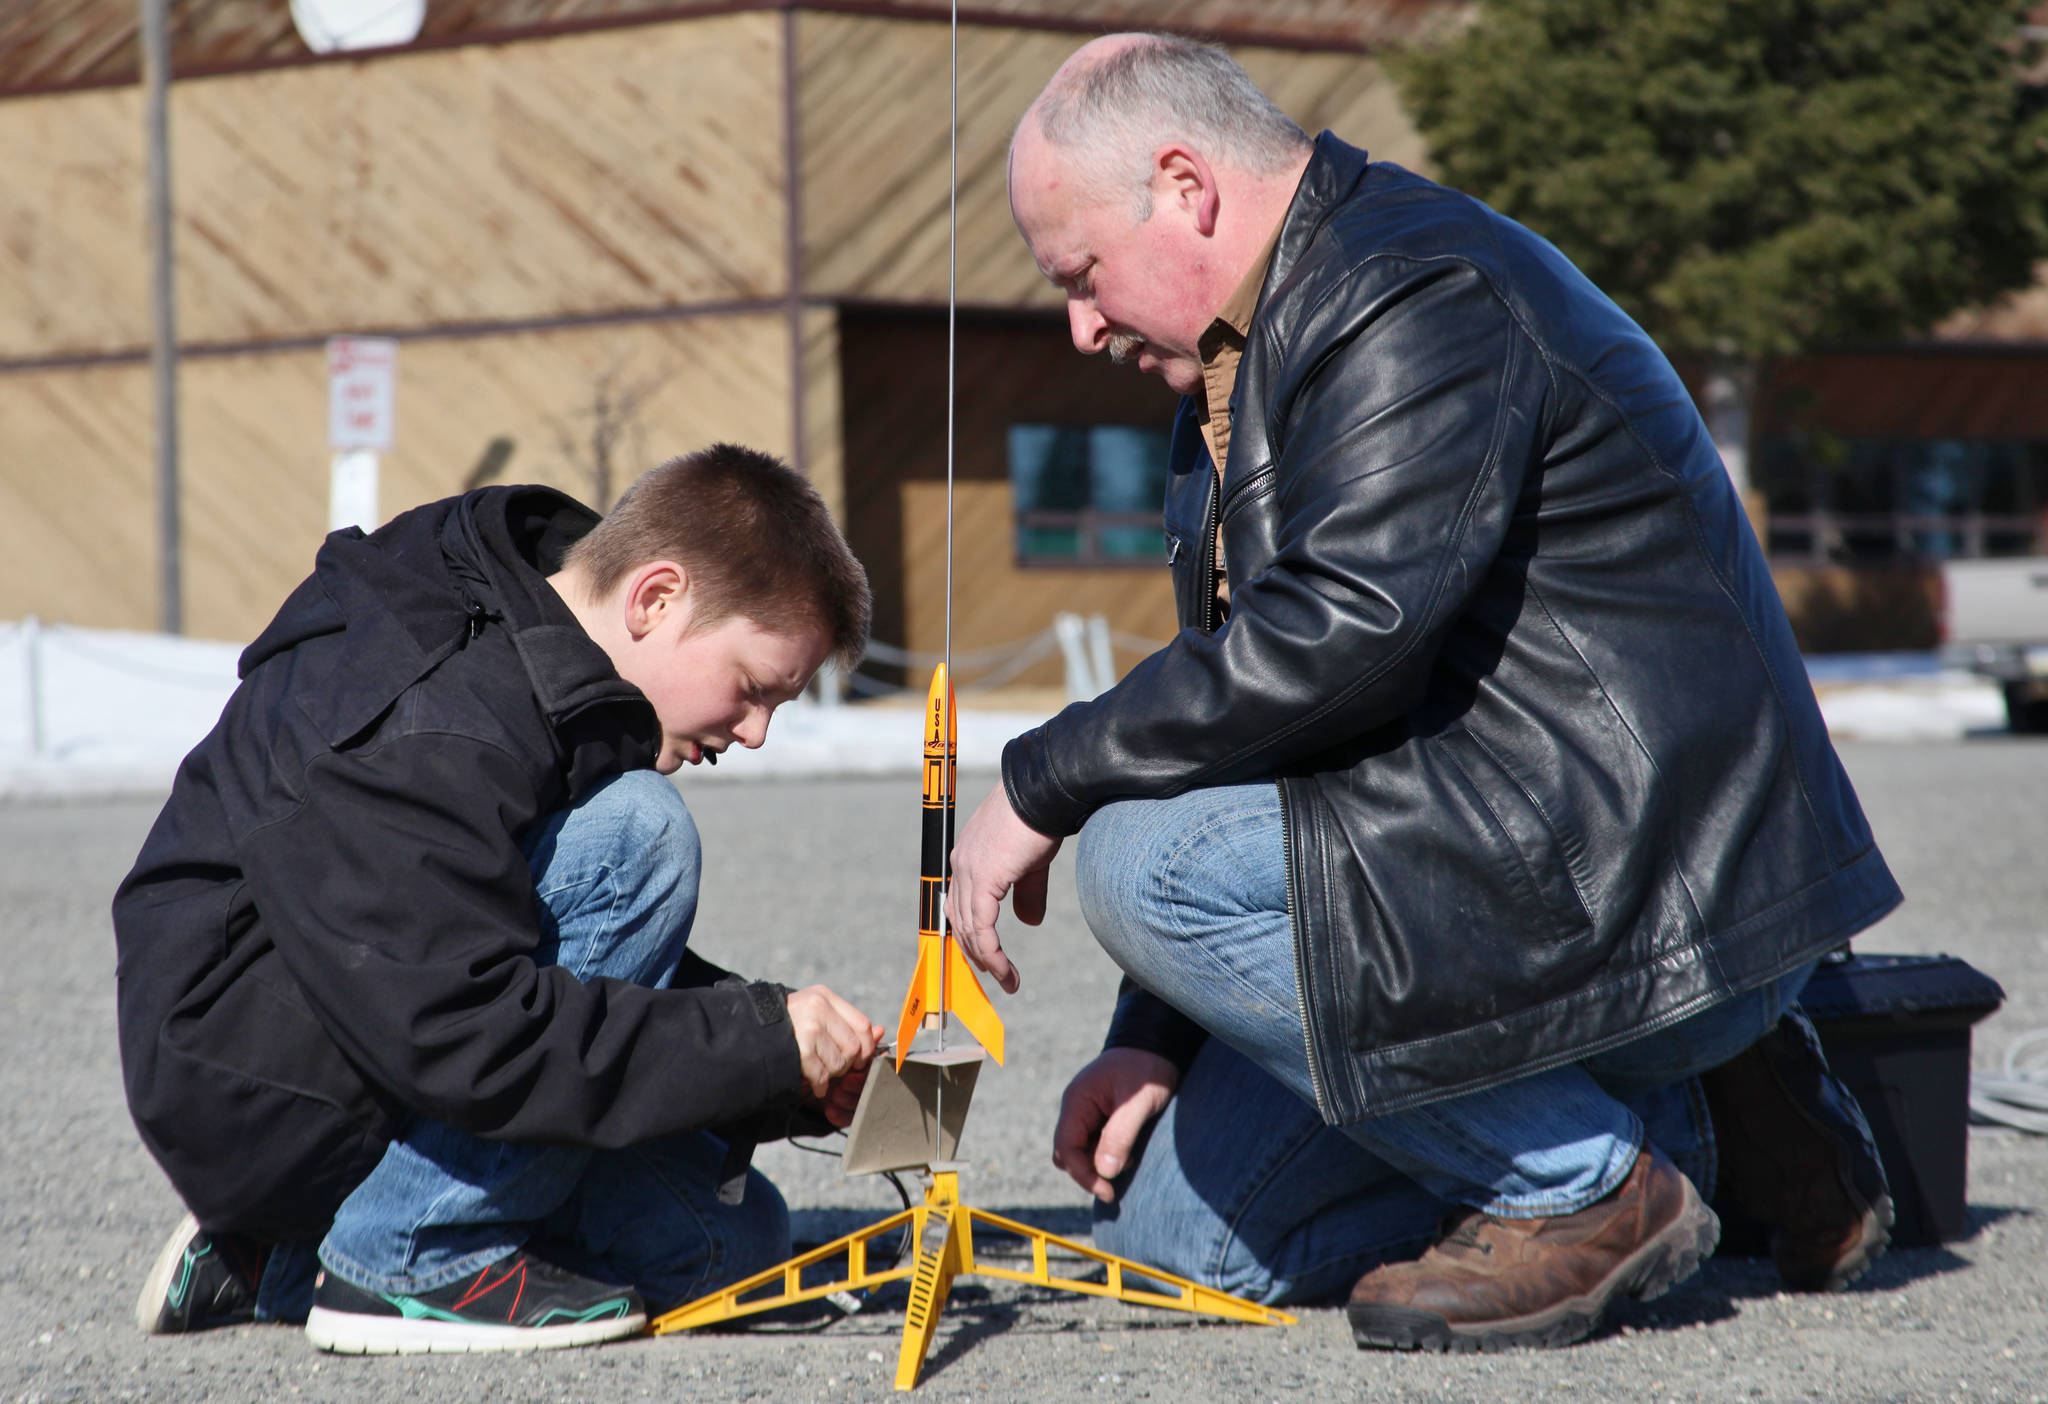 Asa Lorentzen (left) clips wires to ignition contacts while model rocketry instructor Scott Aleckson observes in the parking lot of the Soldotna Regional Sports Complex in Soldotna on Saturday. Aleckson said he made and launched his first plastic, balsa wood, and cardboard rocket as a 4th grade student at Soldotna Elementary School. Since then he’s built a custom launch system, he said, “with recycled electronics and a lot of soldering time.” Aleckson taught Saturday’s rocketry class through the Soldotna Community Schools program, and would like to continue spreading the hobby. “If I could get a model rocket club going, that’d be great,” he said. “Stuff like this is much more fun in a group.” (Photo by Ben Boettger/Peninsula Clarion)